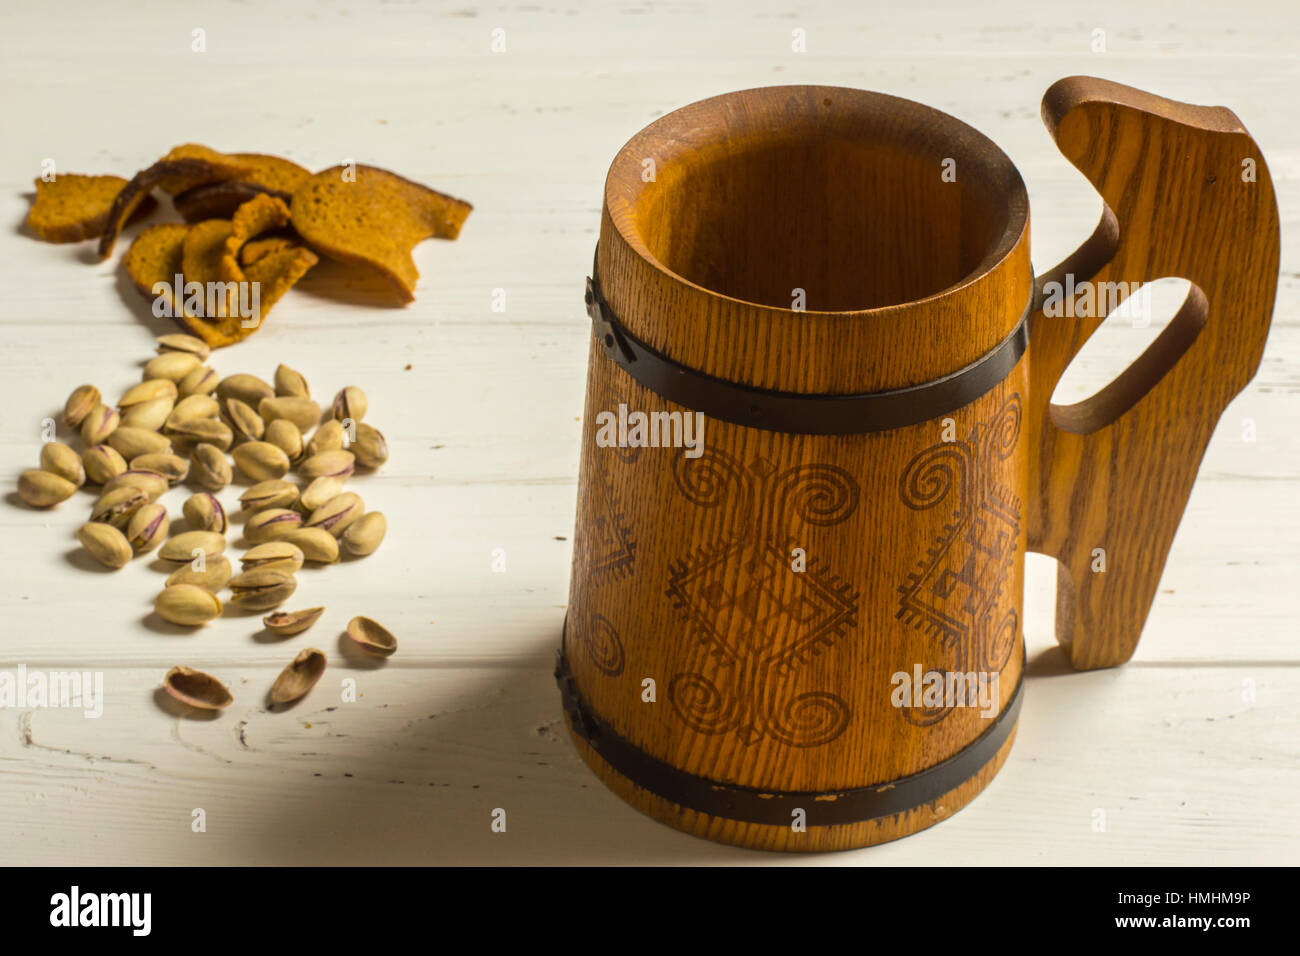 Wooden Beer Mug, Pistachio Nuts, and Dried Bread on Wooden Background Stock Photo